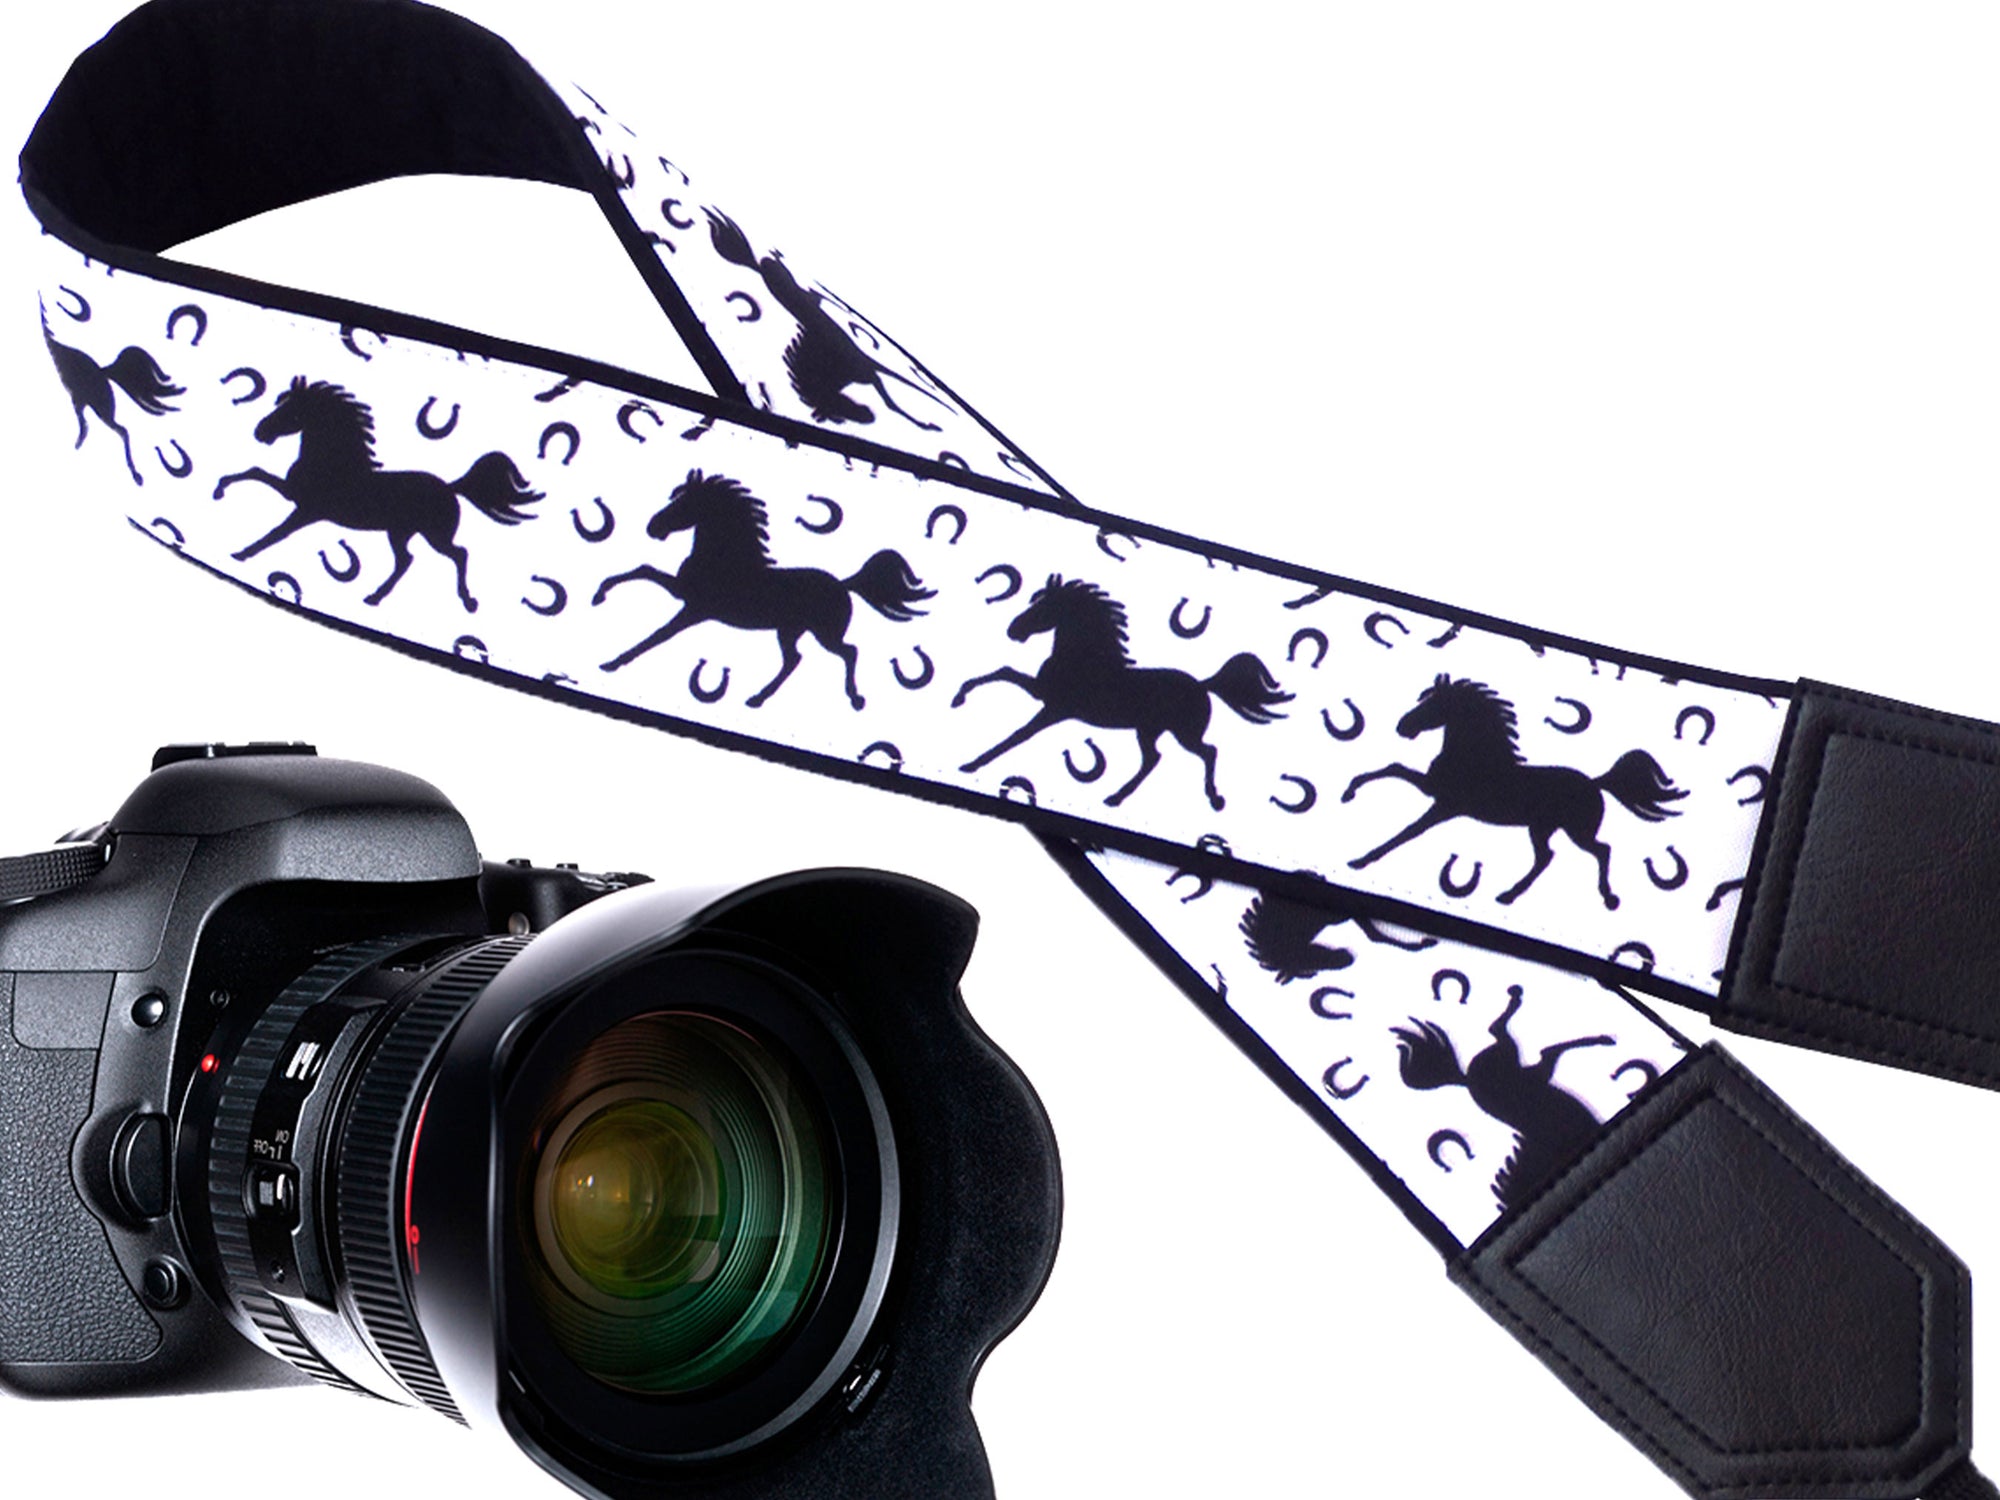 Black Horses Camera Strap, Black And White Camera Strap. DSLR mirrorless Camera Strap, Camera Accessories for travelers and photographers.